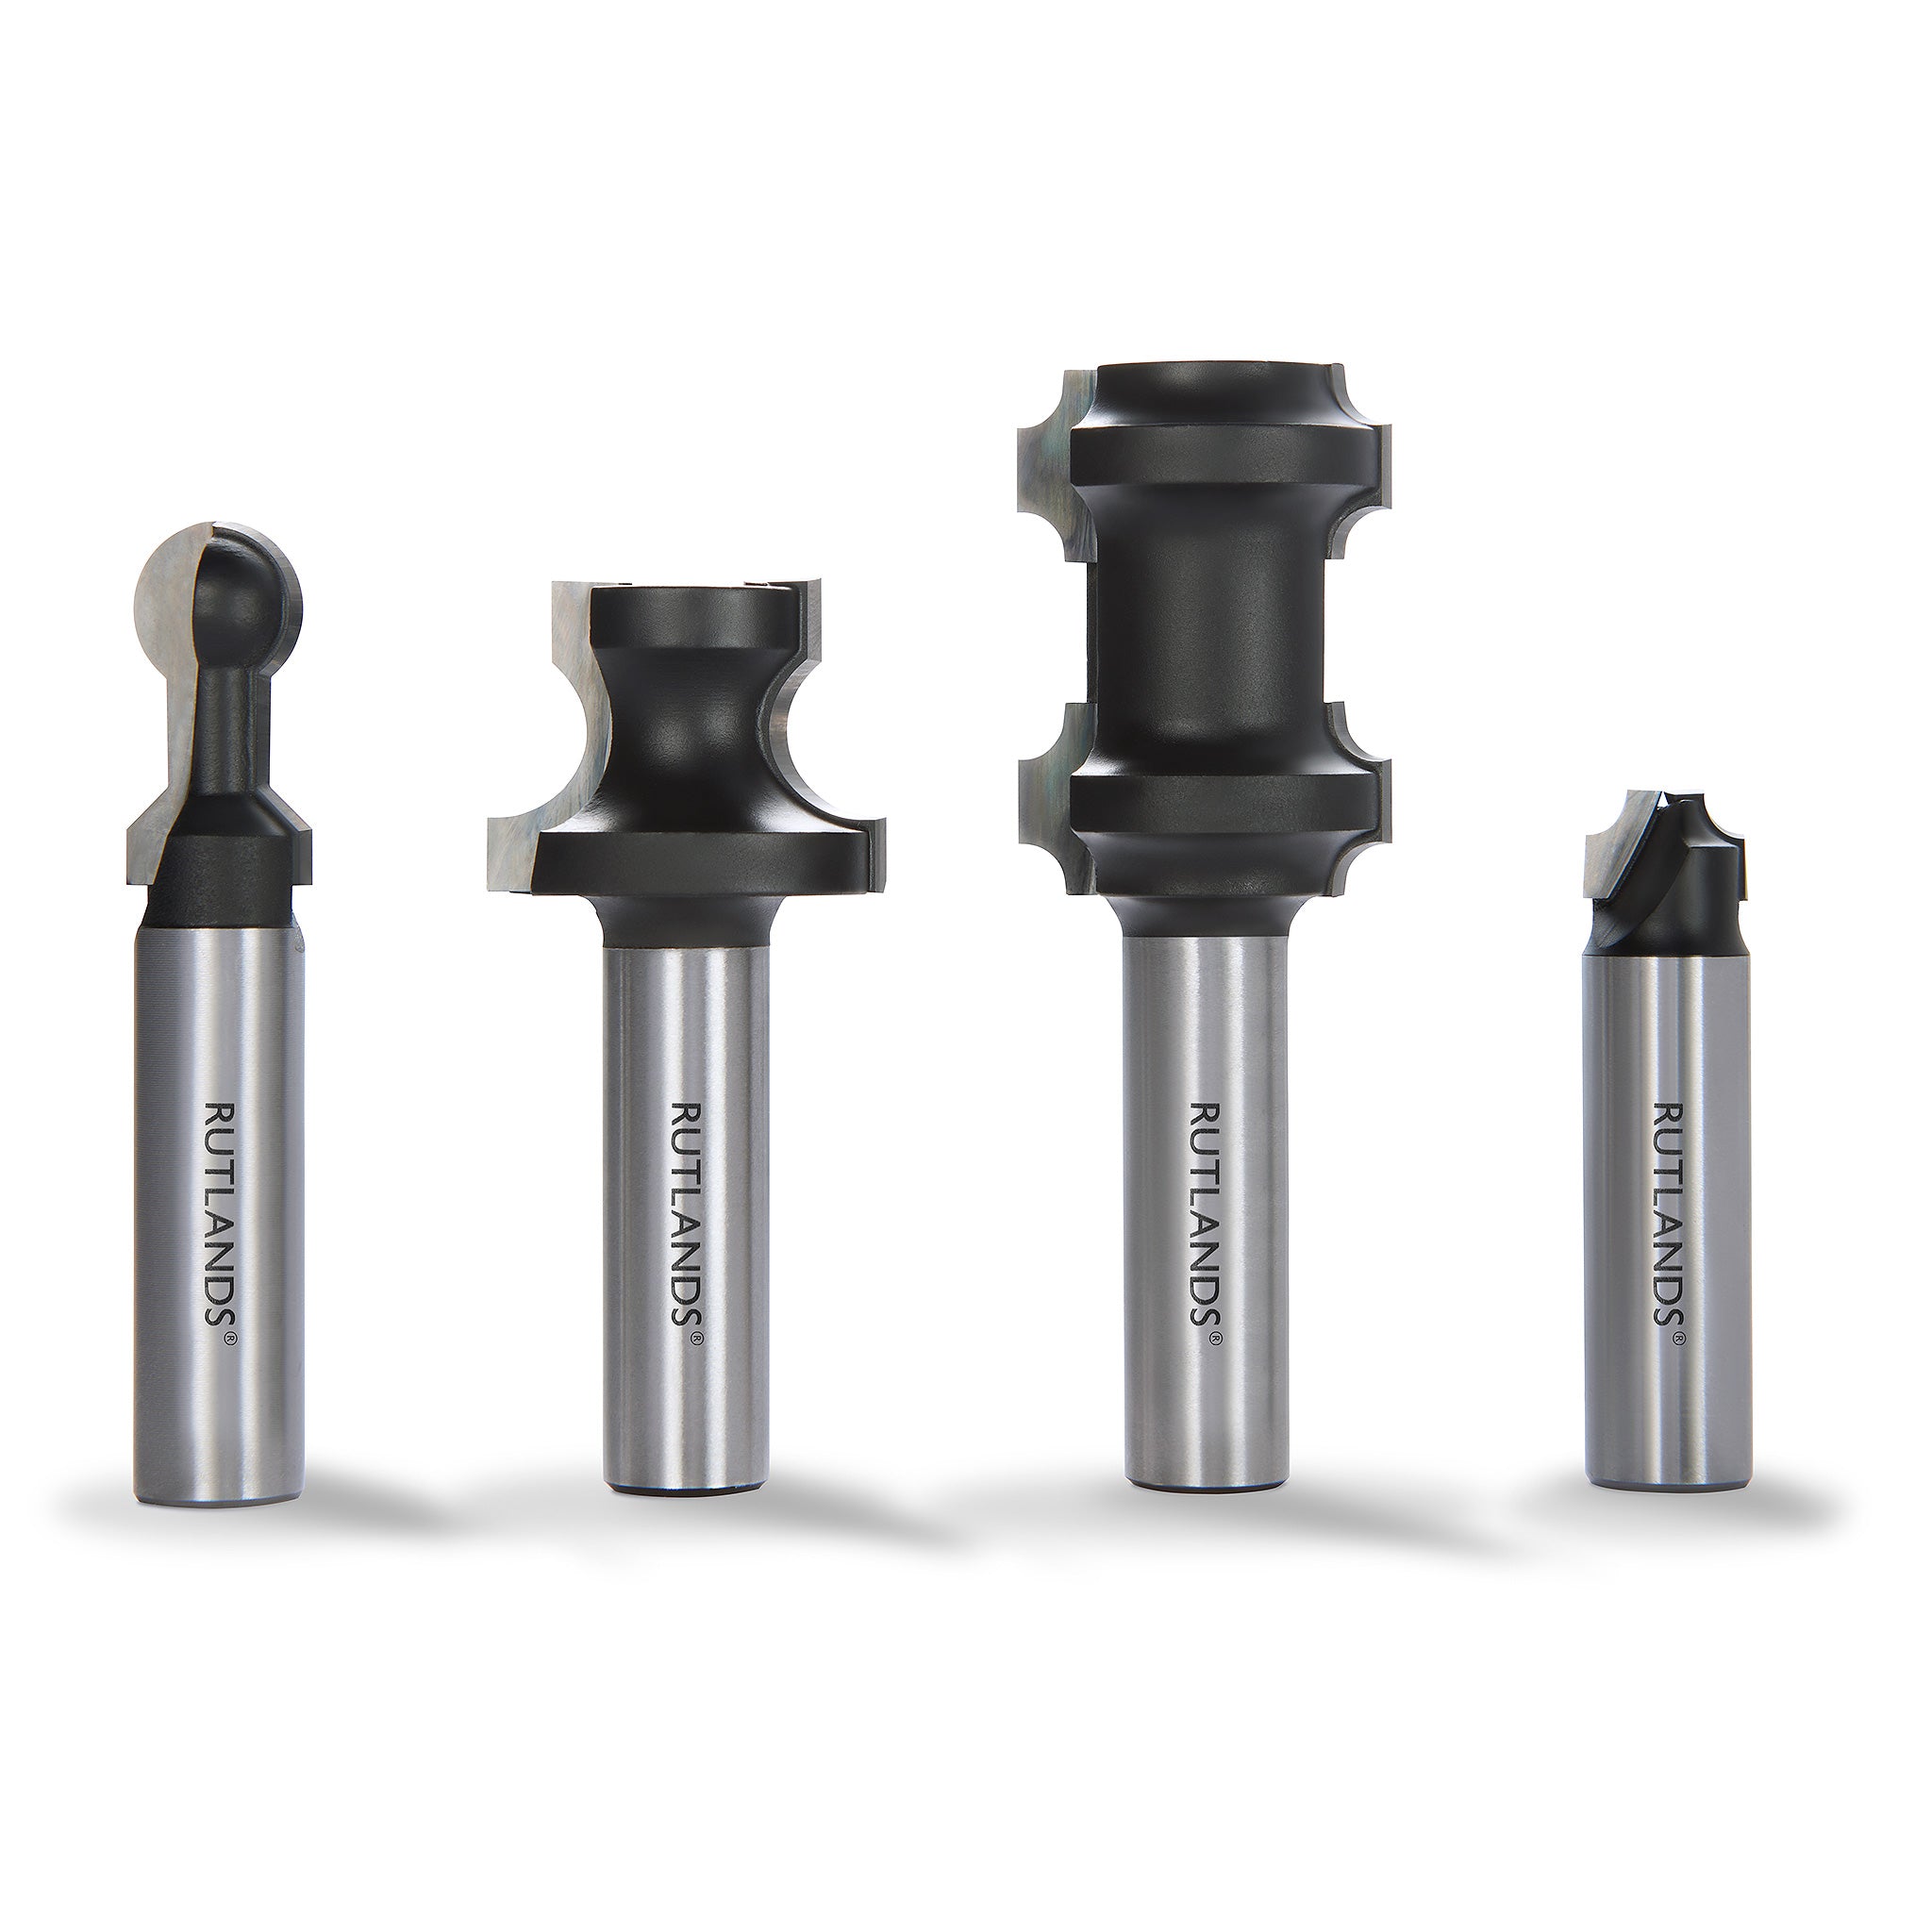 TCT Router Bit Set Railway Track Next Day Delivery – Rutlands Limited